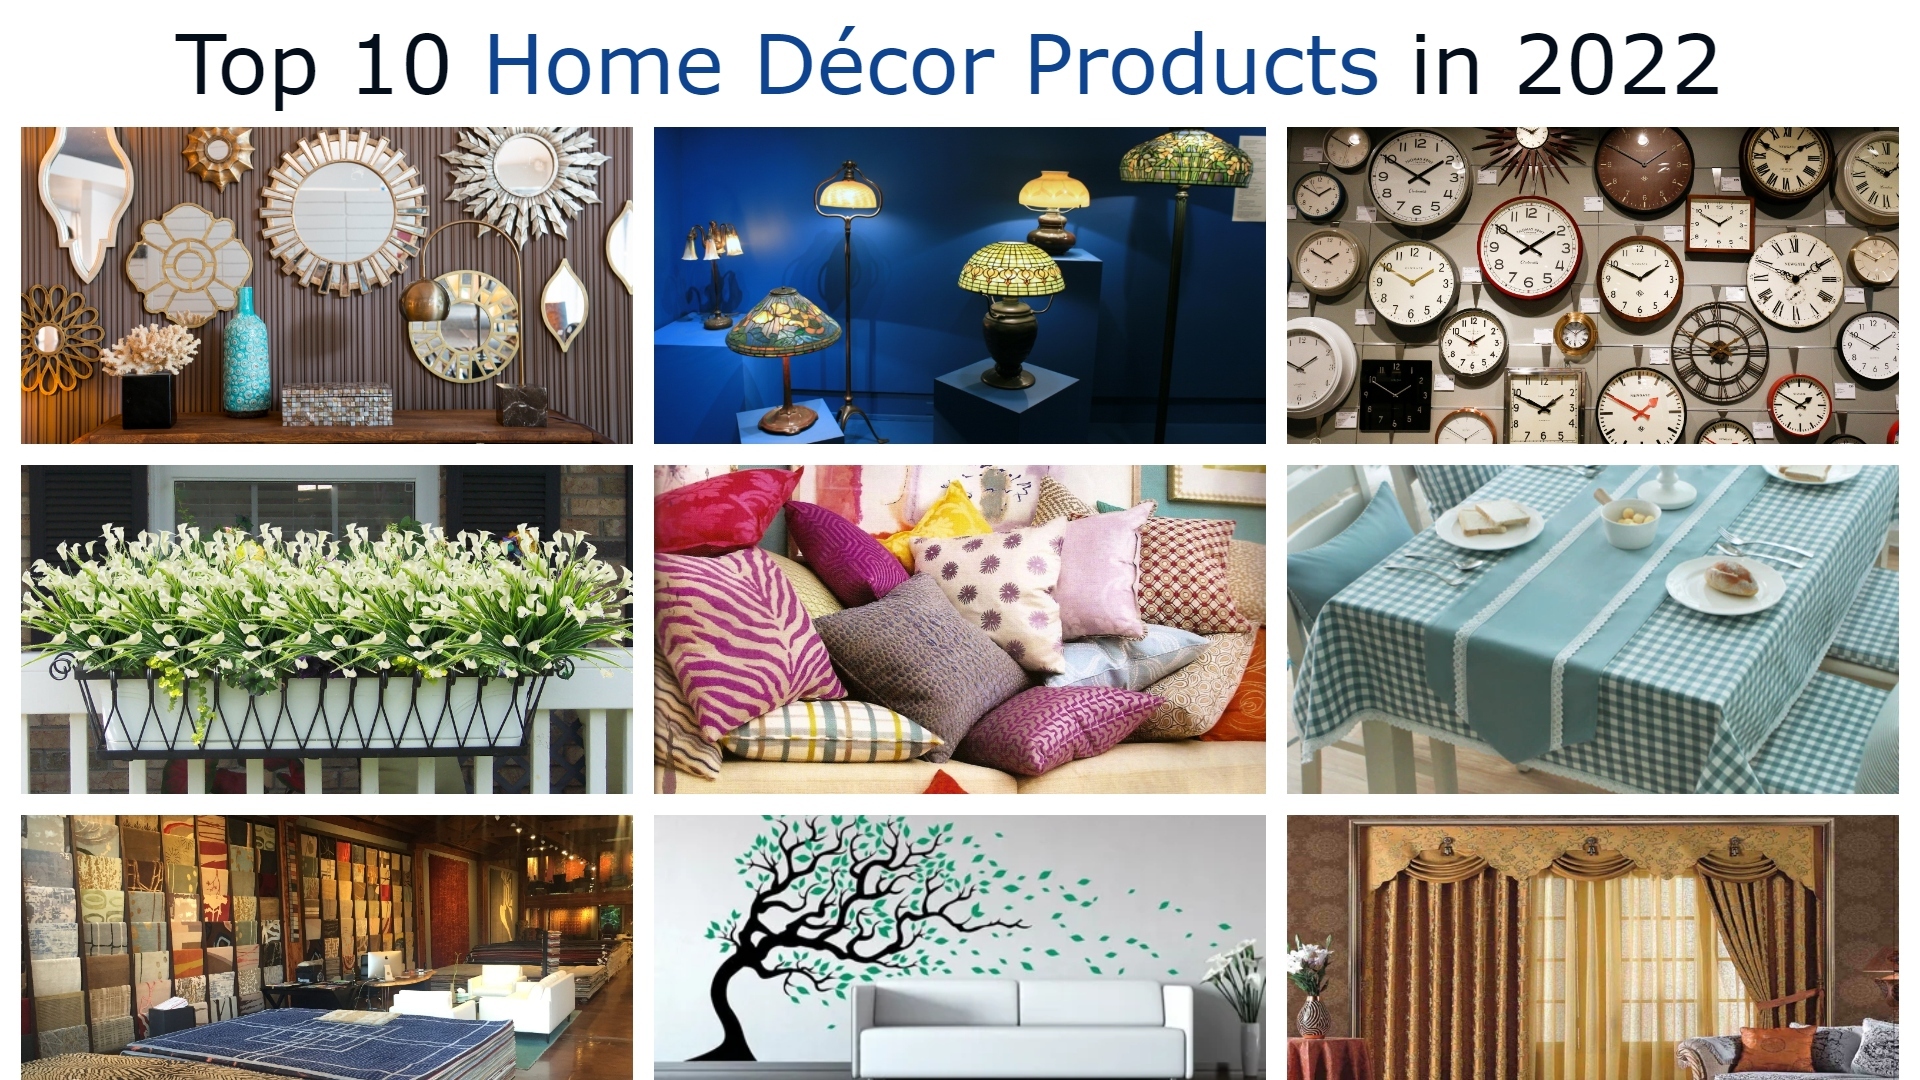 Top 10 Home Décor Products in 2022